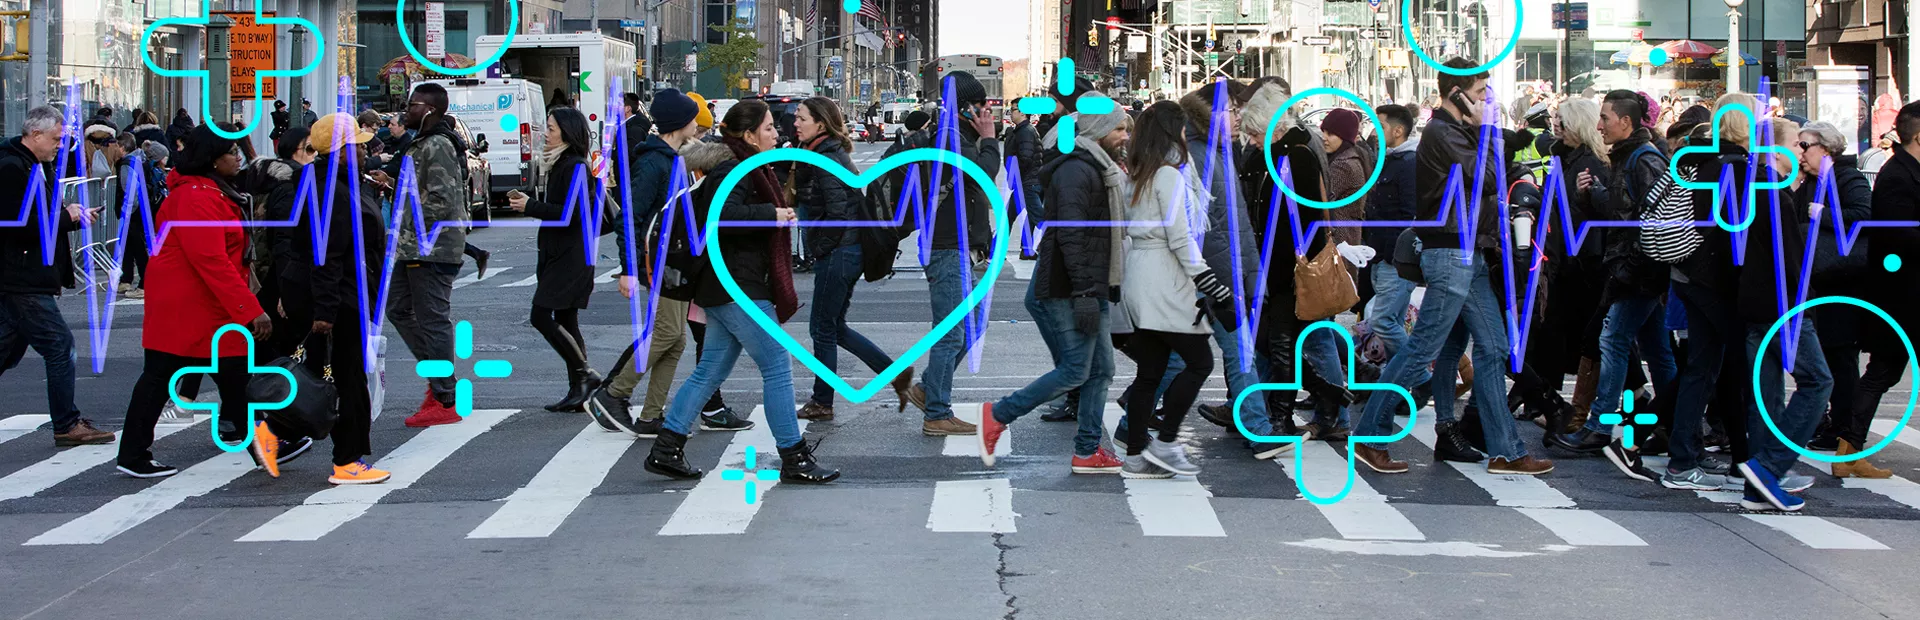 People on a pedestrian crossing in a city